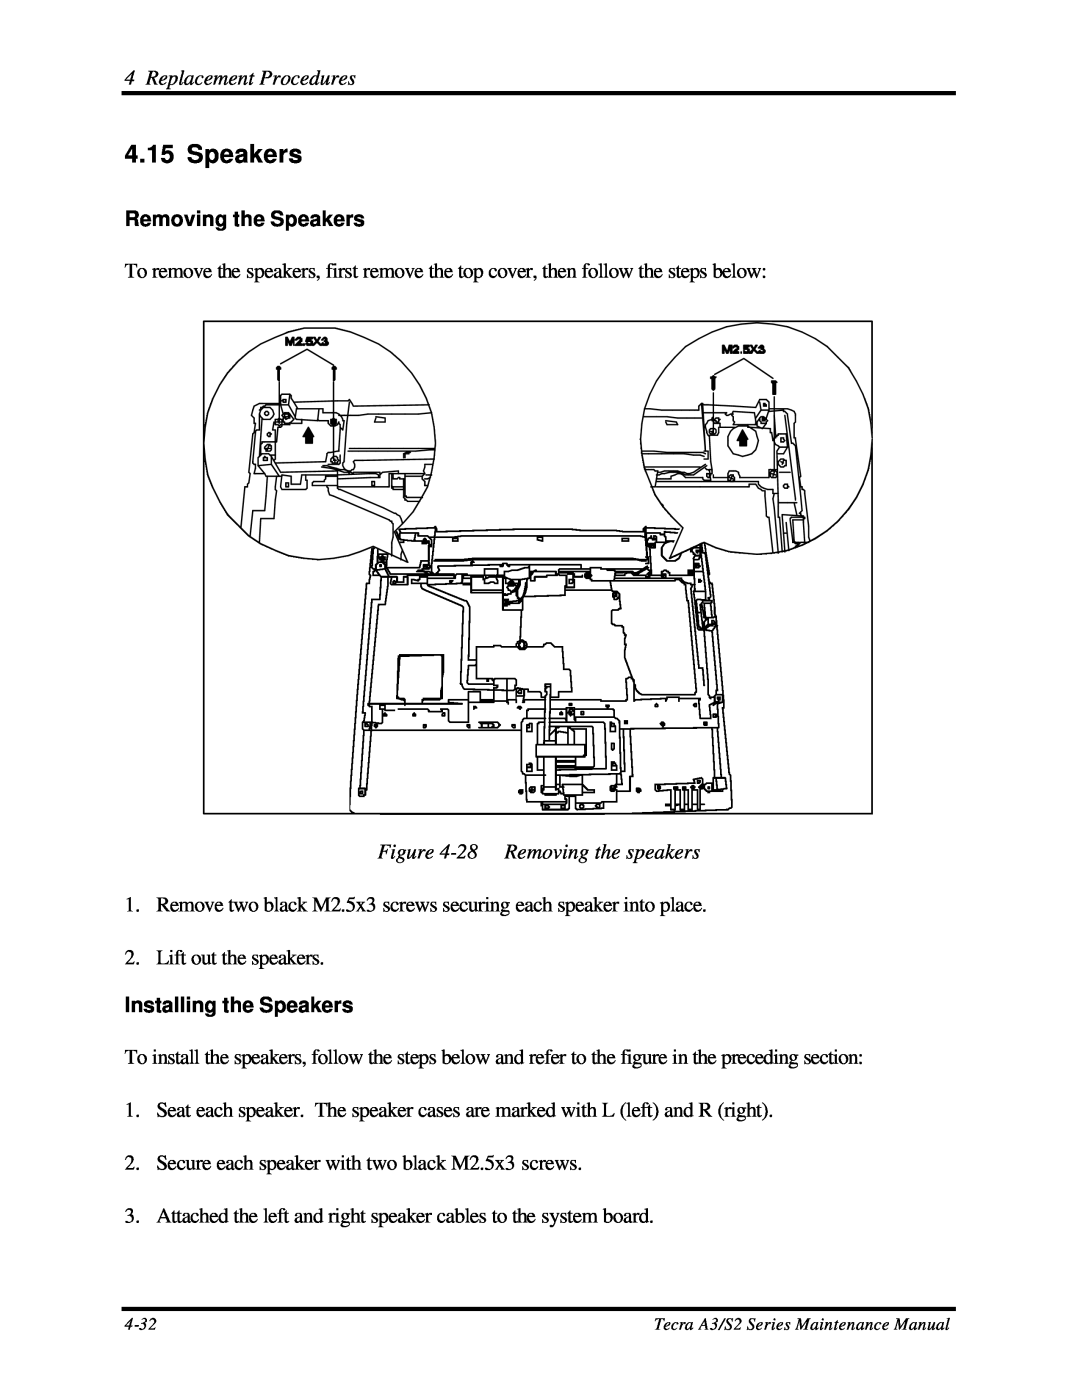 Toshiba S2 manual Removing the Speakers, 28 Removing the speakers, Installing the Speakers, Replacement Procedures 